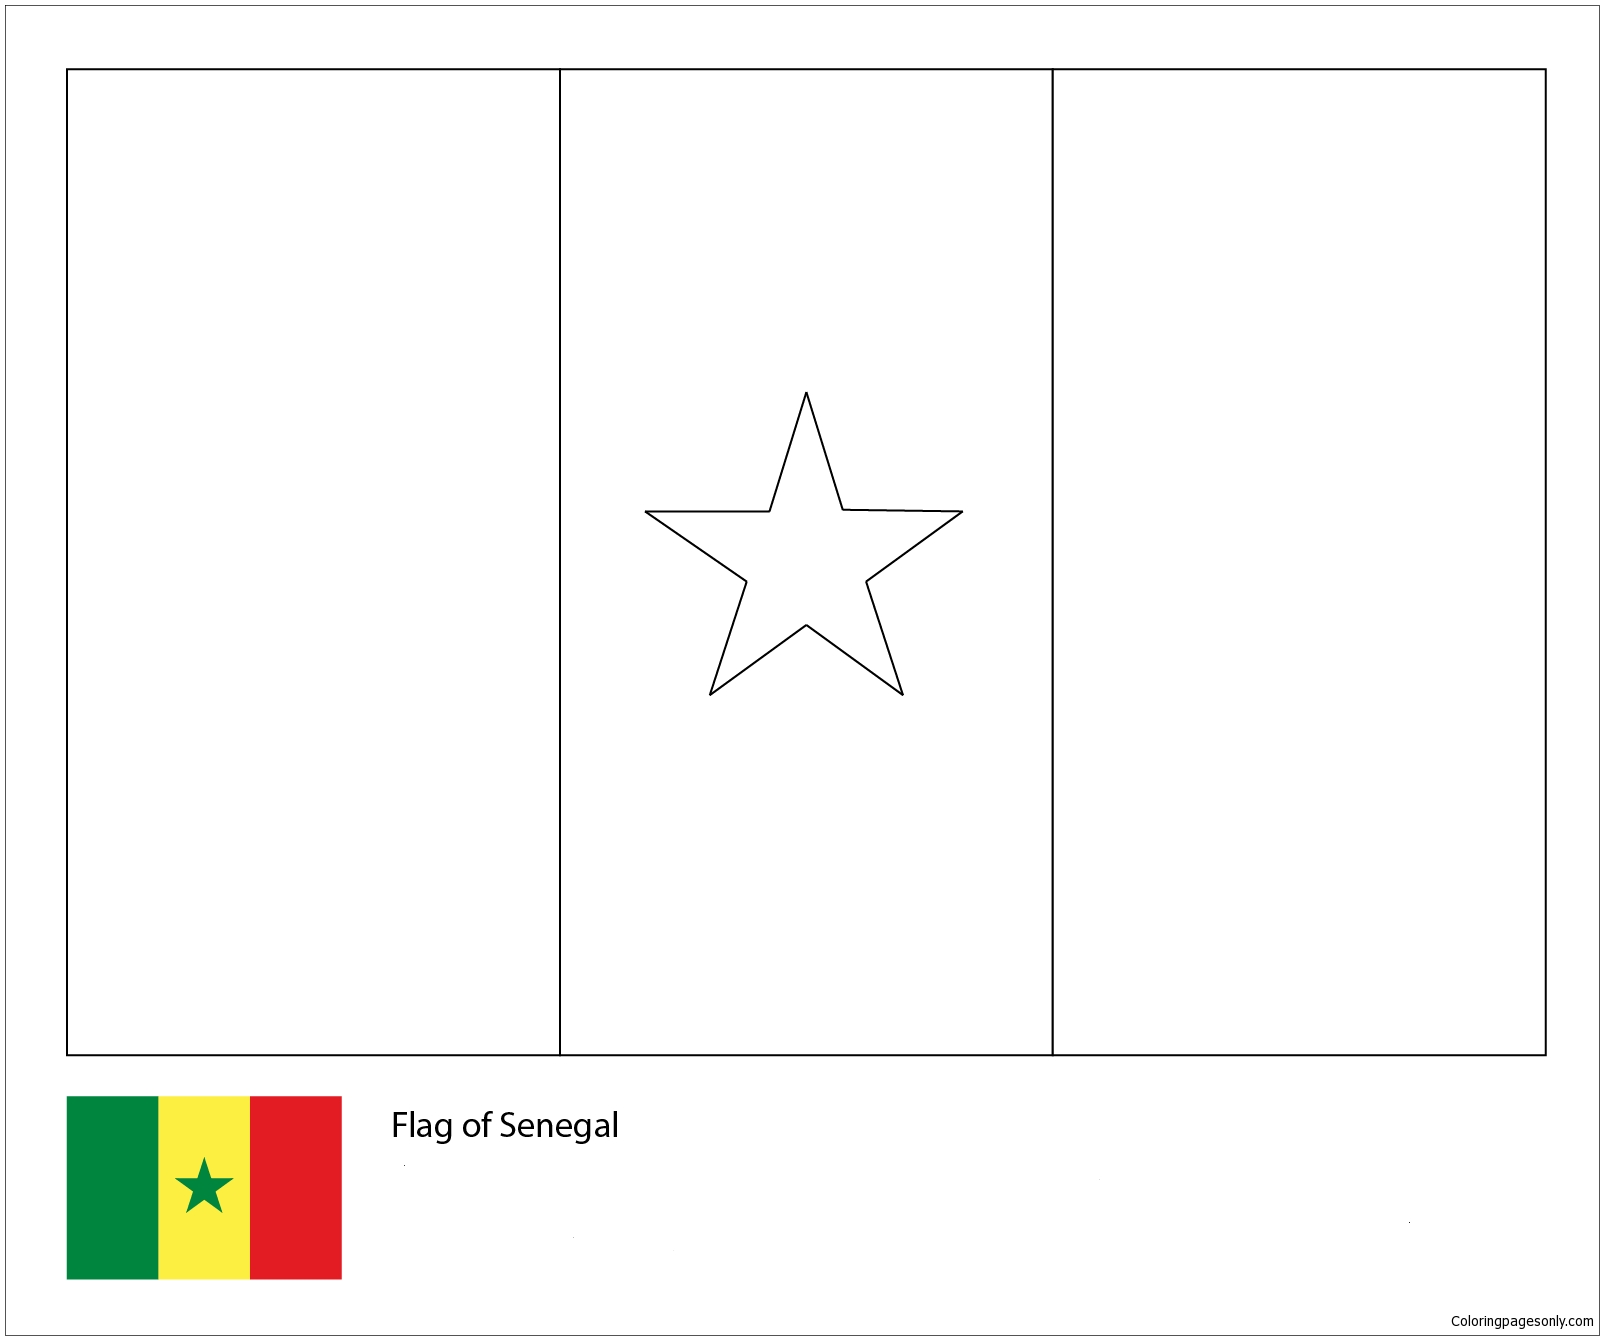 Flag of Senegal-World Cup 2018 from World Cup 2018 Flags